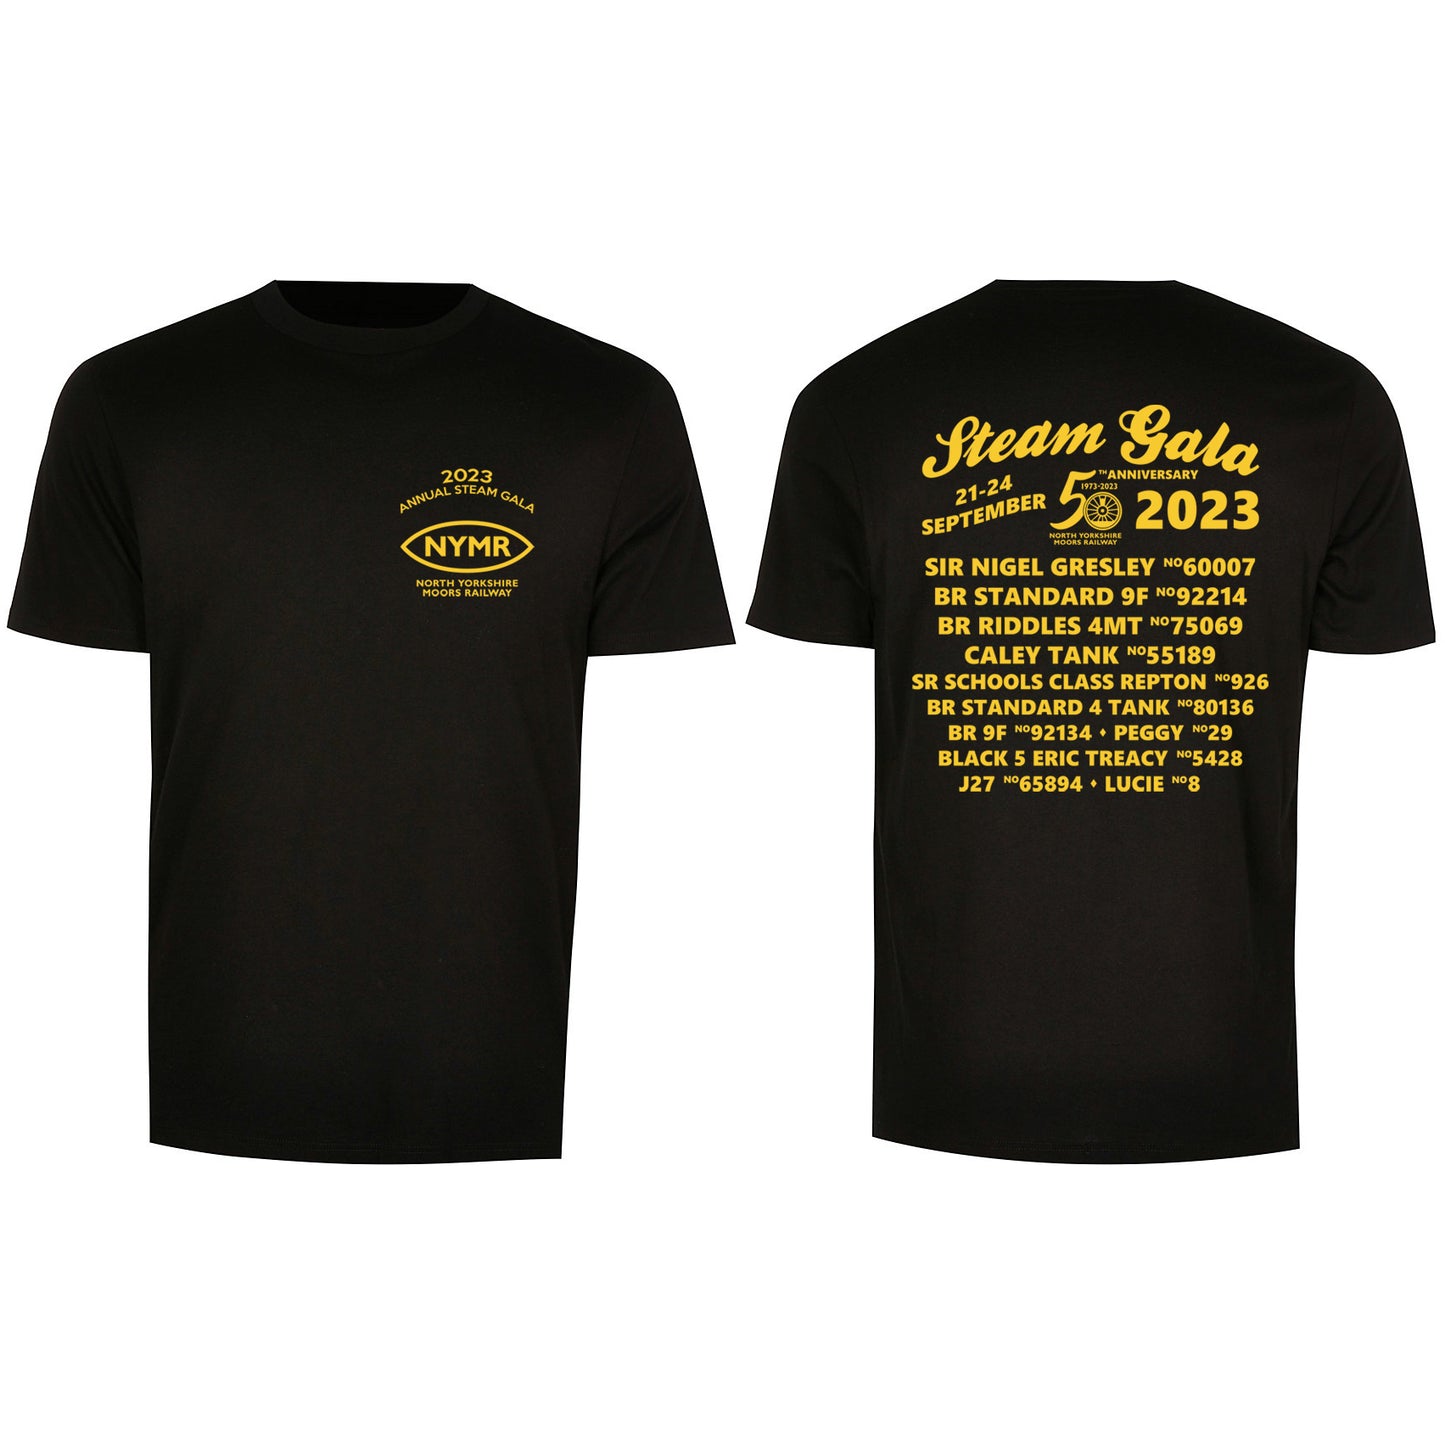 Image showing both the front and back views of the T-shirt